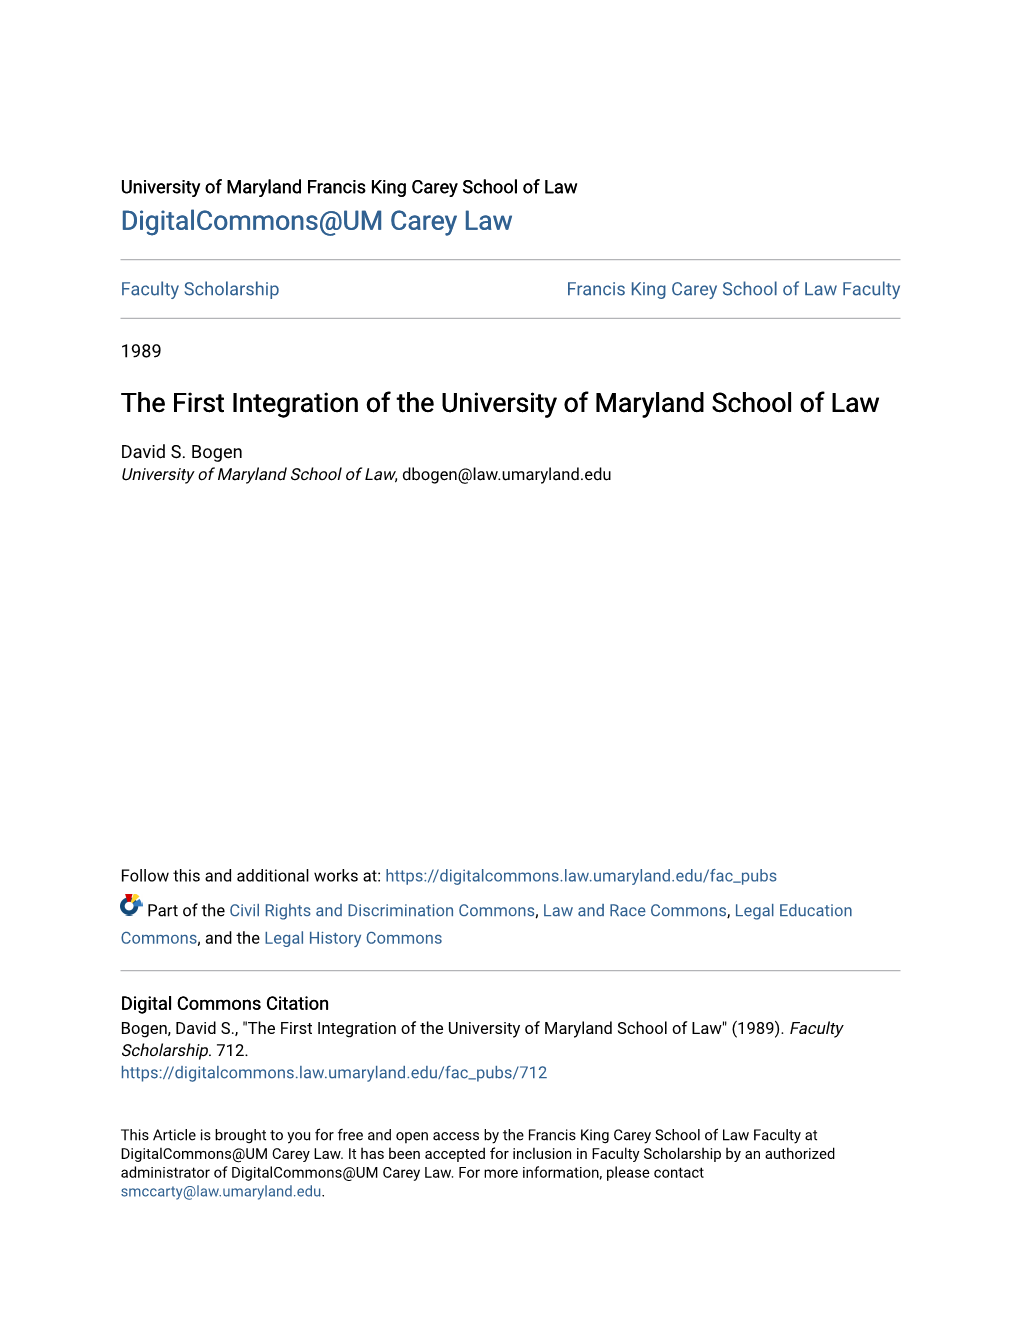 The First Integration of the University of Maryland School of Law